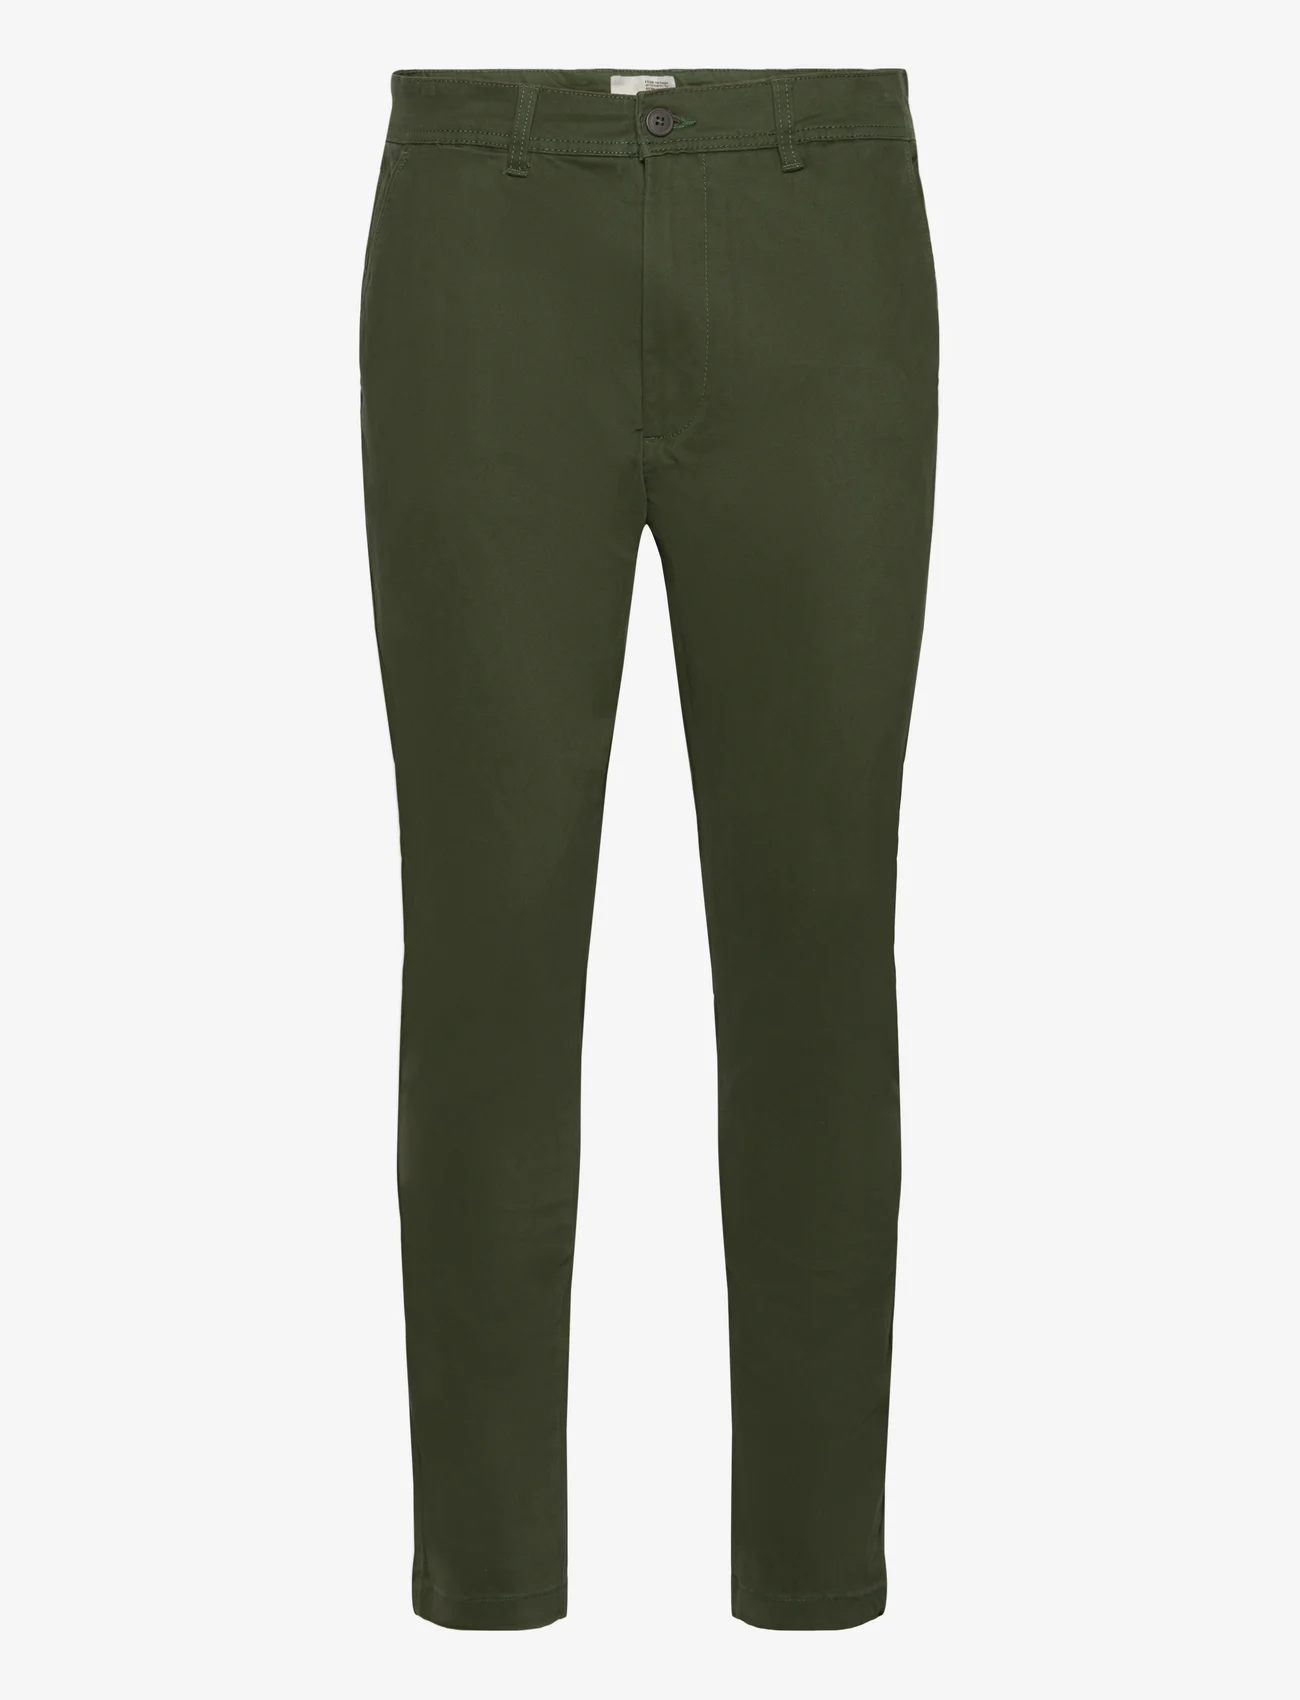 Solid - SDJIM PANTS - chinos - black forest - 0